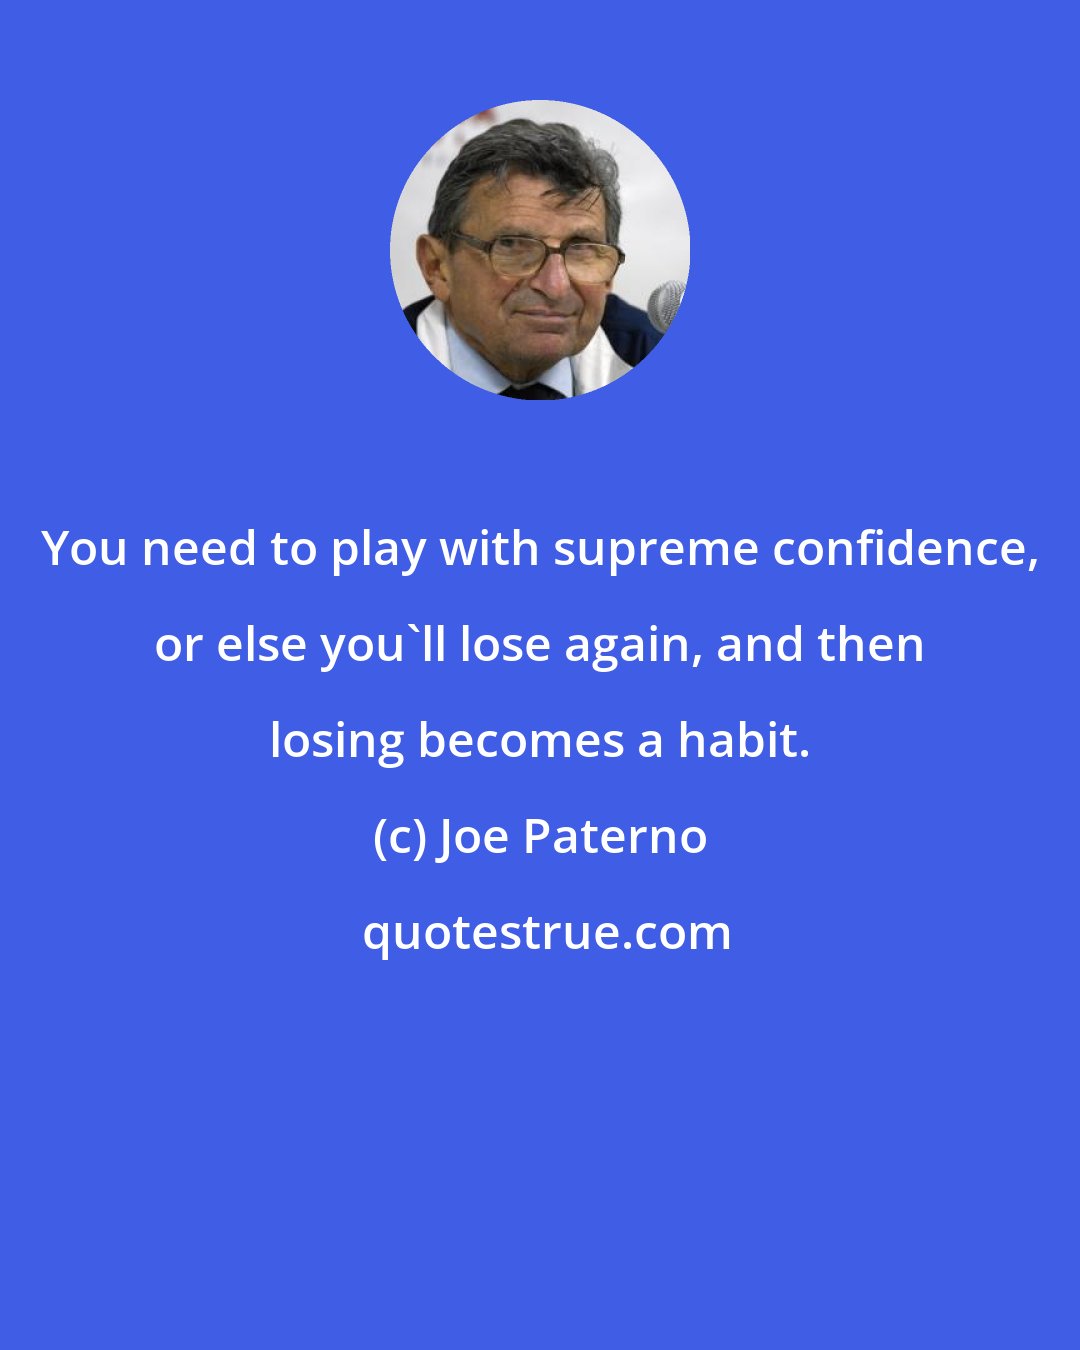 Joe Paterno: You need to play with supreme confidence, or else you'll lose again, and then losing becomes a habit.